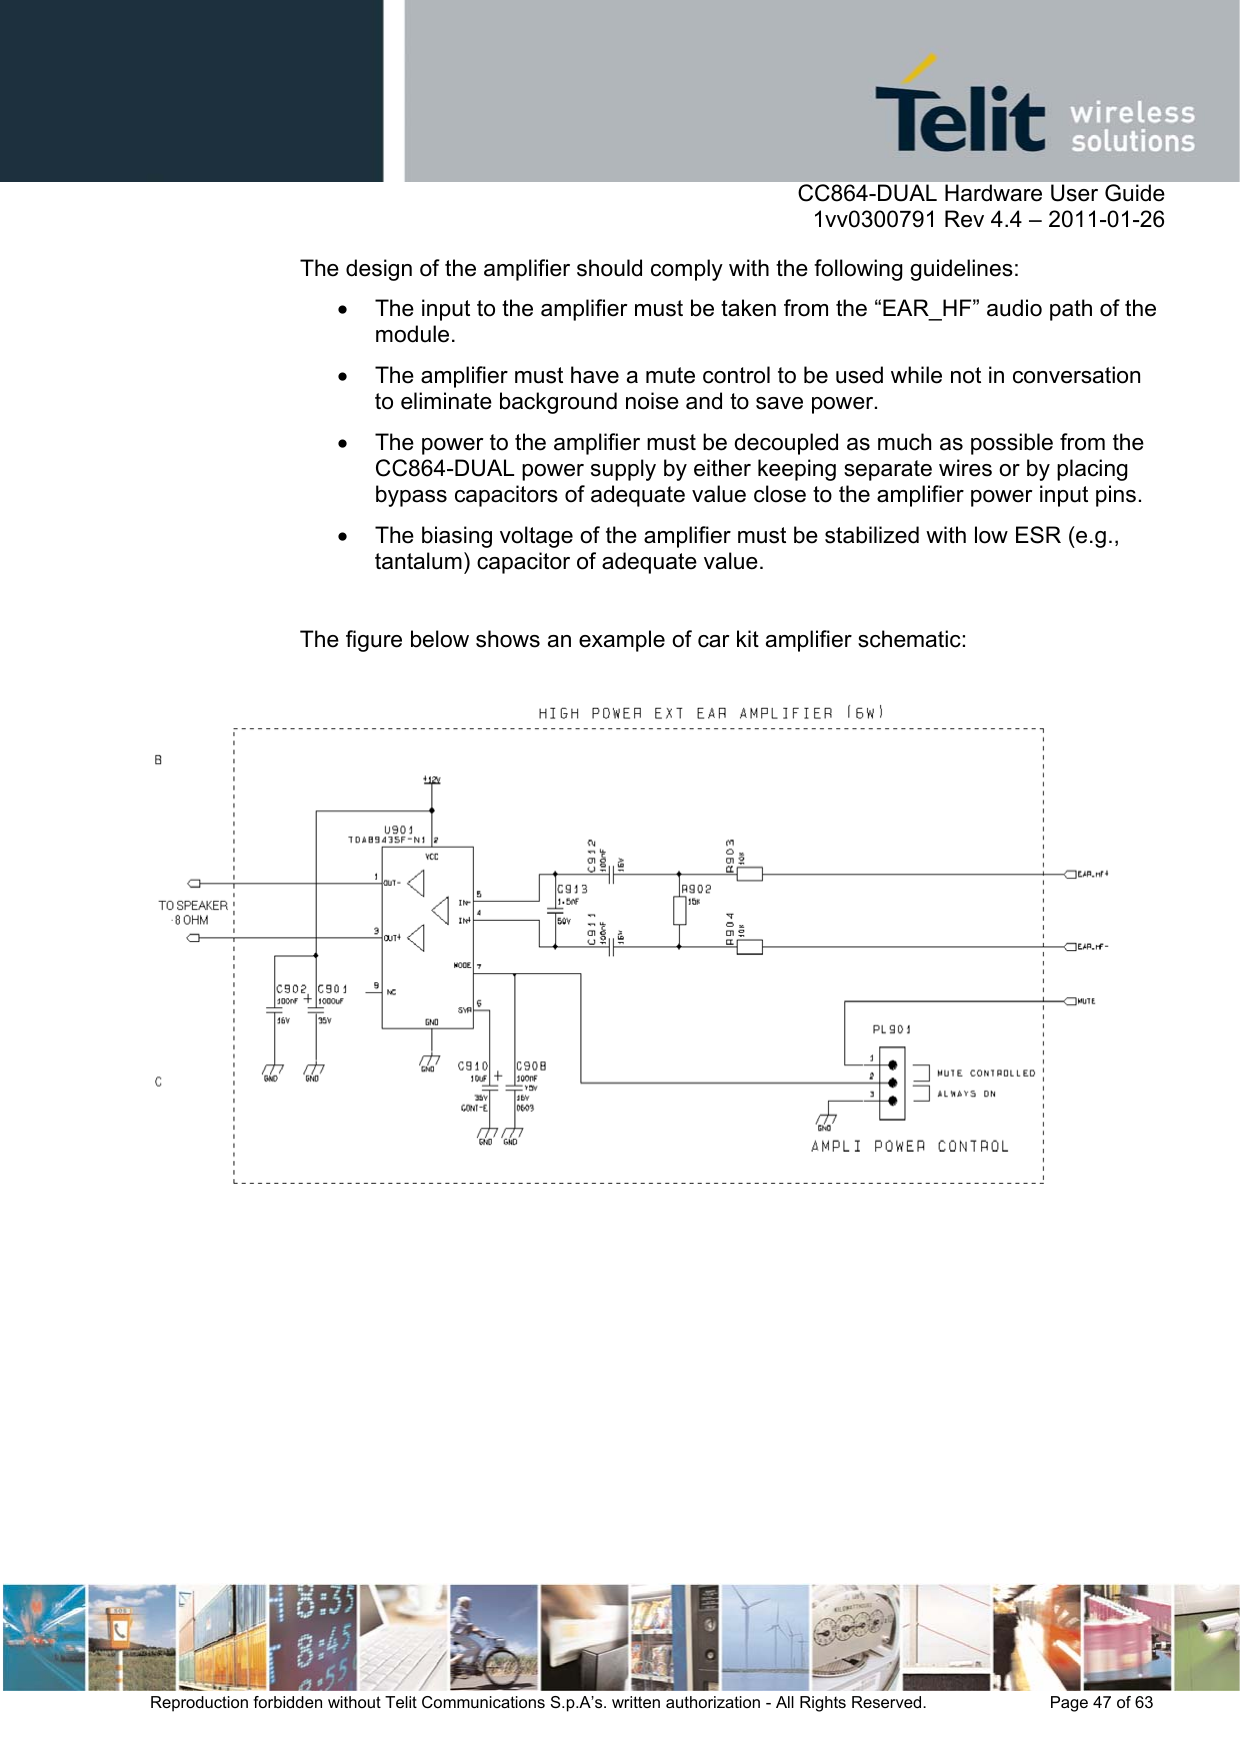      CC864-DUAL Hardware User Guide    1vv0300791 Rev 4.4 – 2011-01-26  Reproduction forbidden without Telit Communications S.p.A’s. written authorization - All Rights Reserved.    Page 47 of 63  The design of the amplifier should comply with the following guidelines:   The input to the amplifier must be taken from the “EAR_HF” audio path of the module.   The amplifier must have a mute control to be used while not in conversation to eliminate background noise and to save power.    The power to the amplifier must be decoupled as much as possible from the CC864-DUAL power supply by either keeping separate wires or by placing bypass capacitors of adequate value close to the amplifier power input pins.   The biasing voltage of the amplifier must be stabilized with low ESR (e.g., tantalum) capacitor of adequate value.  The figure below shows an example of car kit amplifier schematic:     